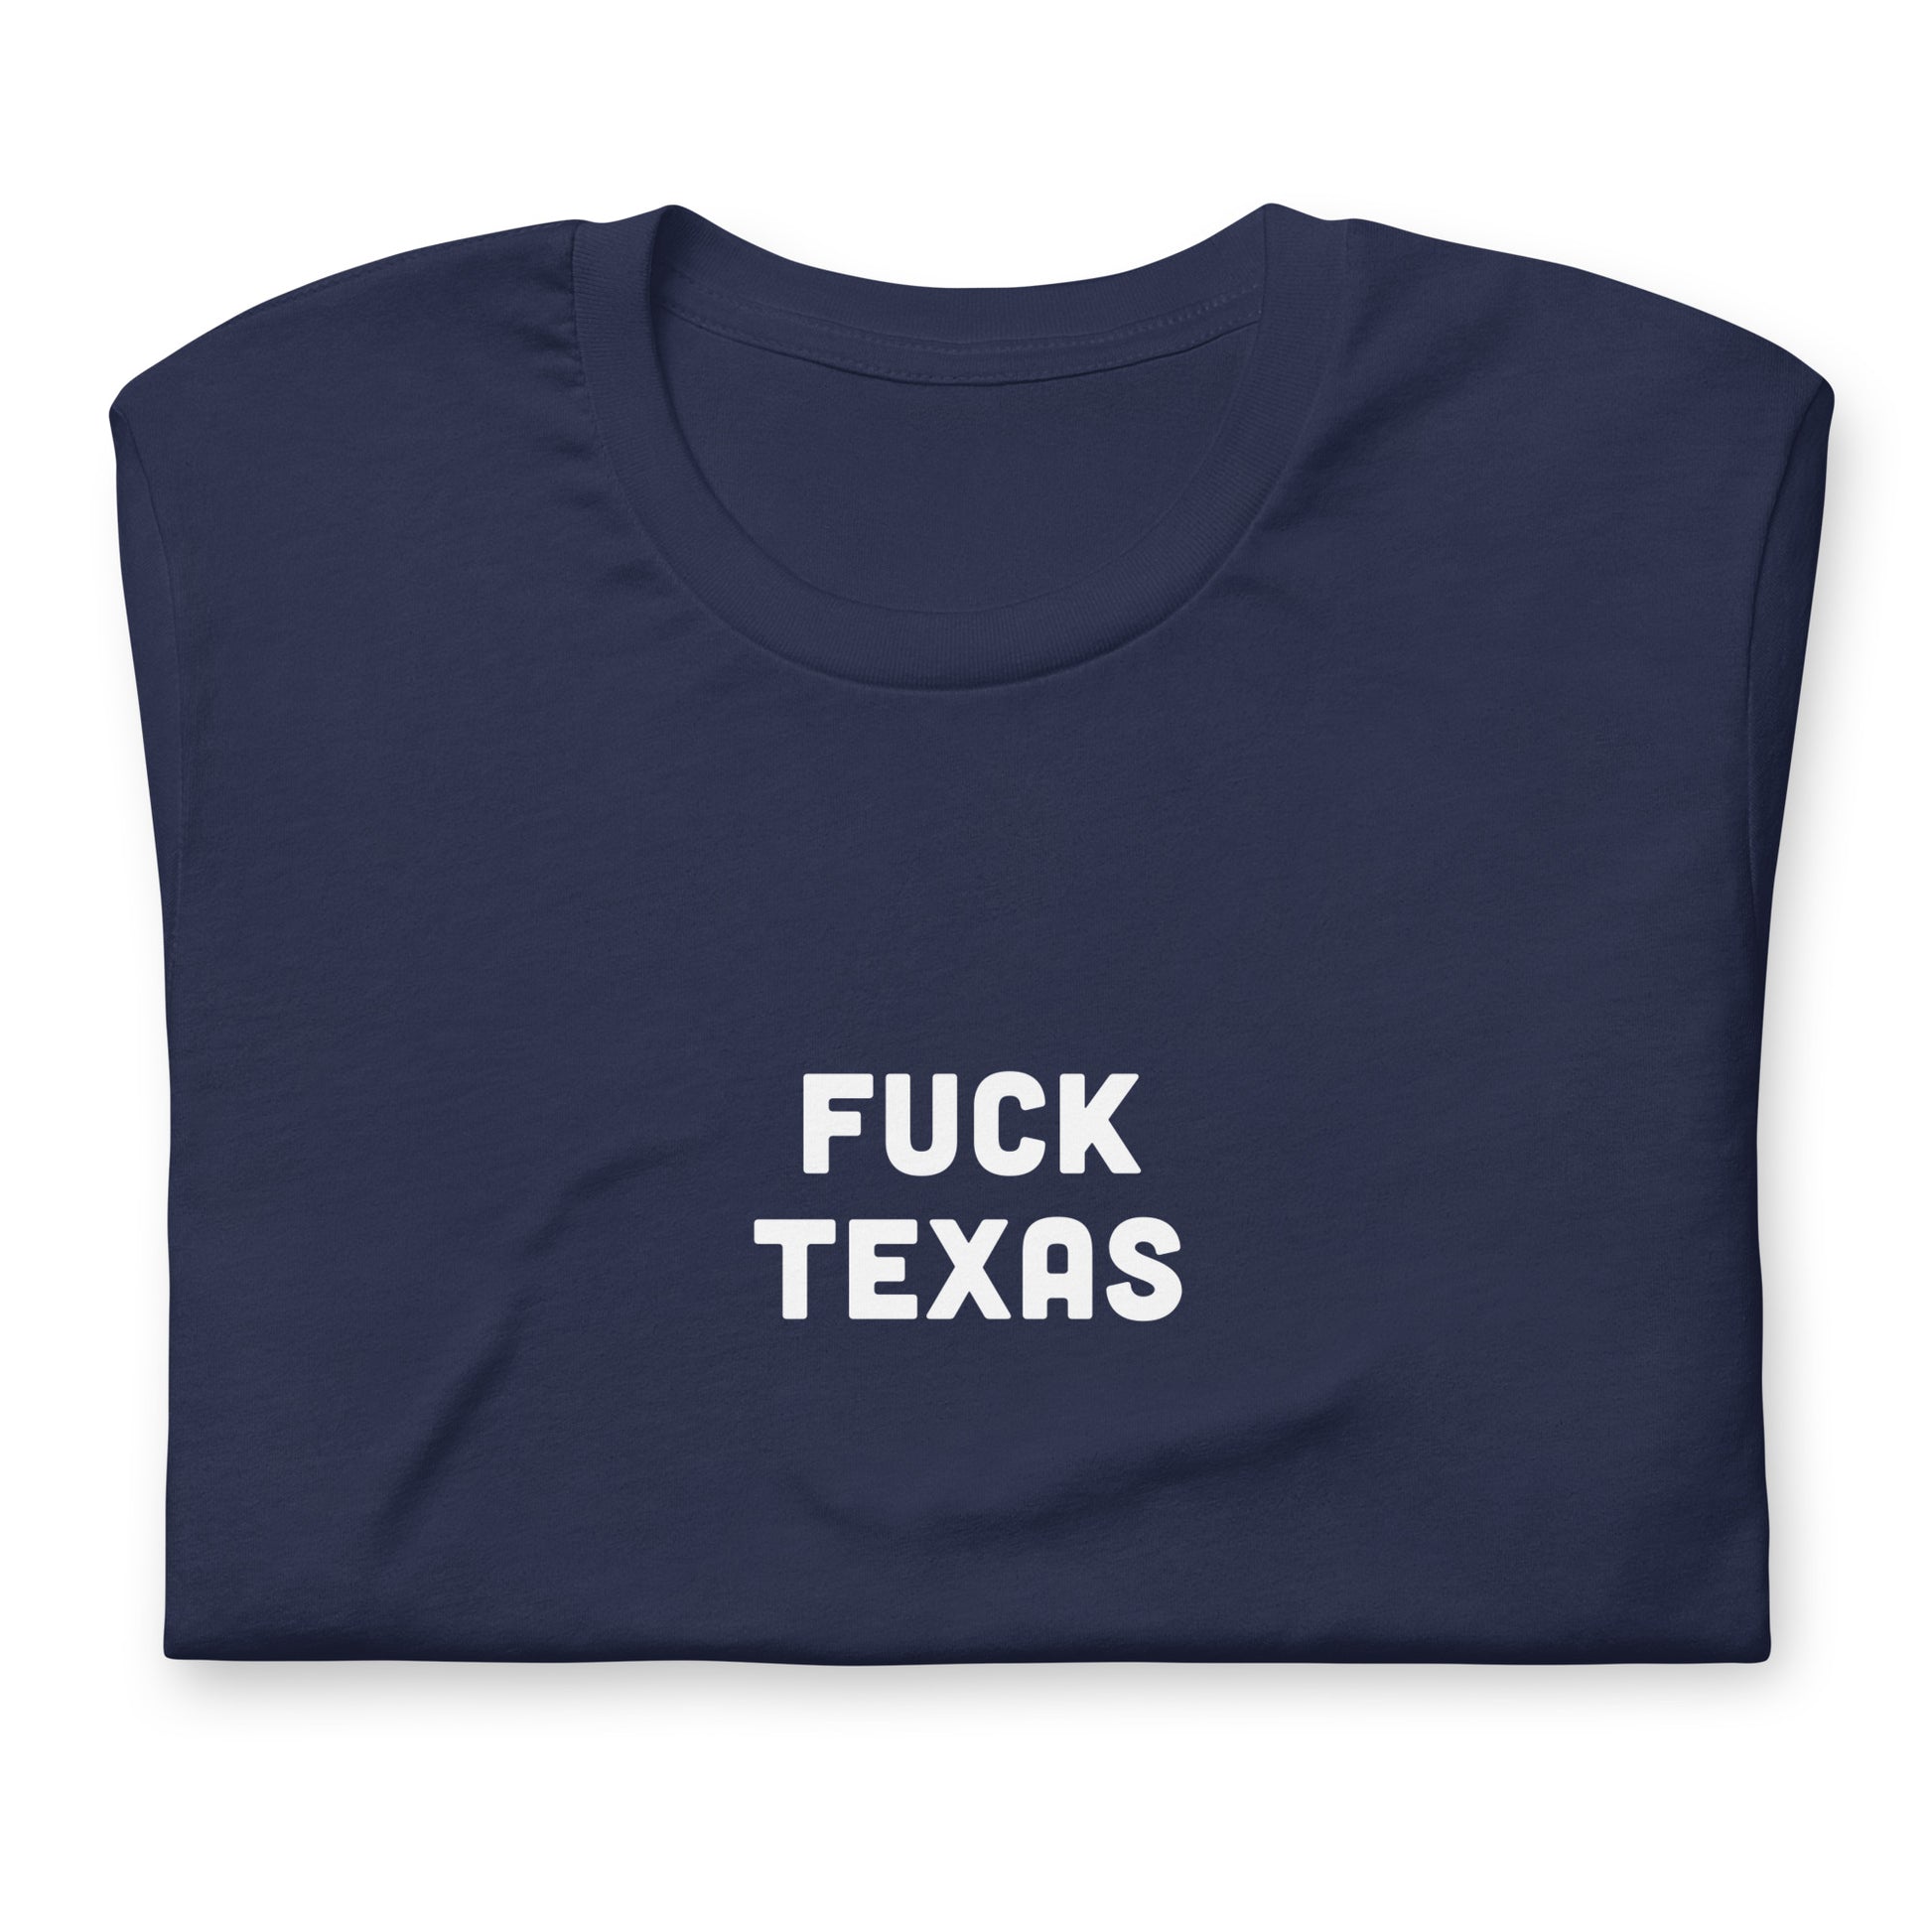 Fuck Texas T-Shirt Size S Color Navy